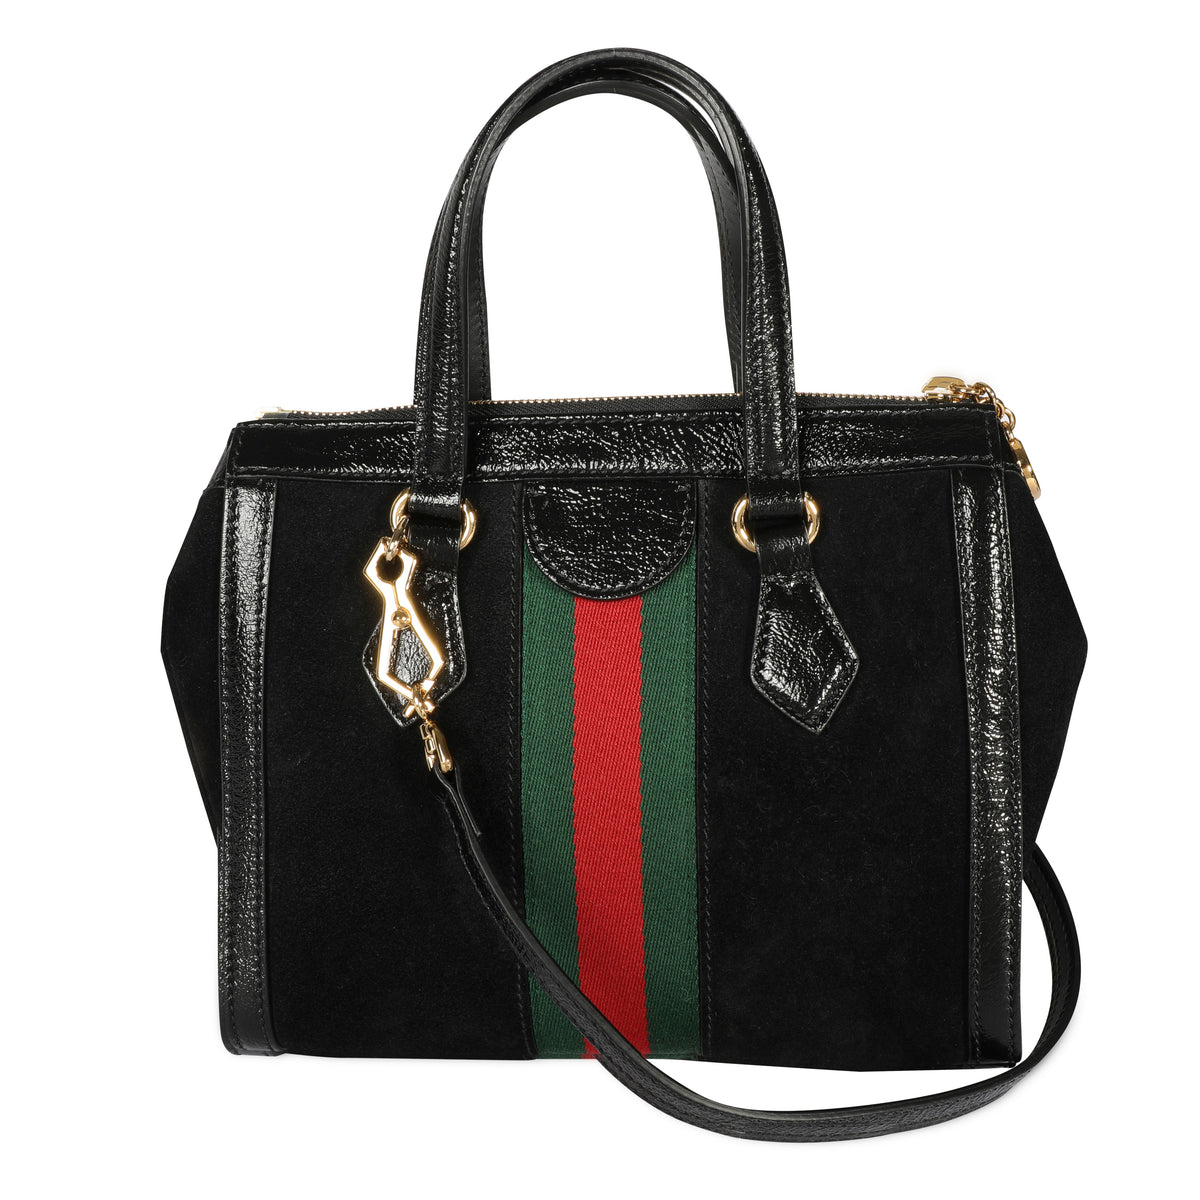 Gucci Black Suede & Patent Leather Small Ophidia Tote Bag